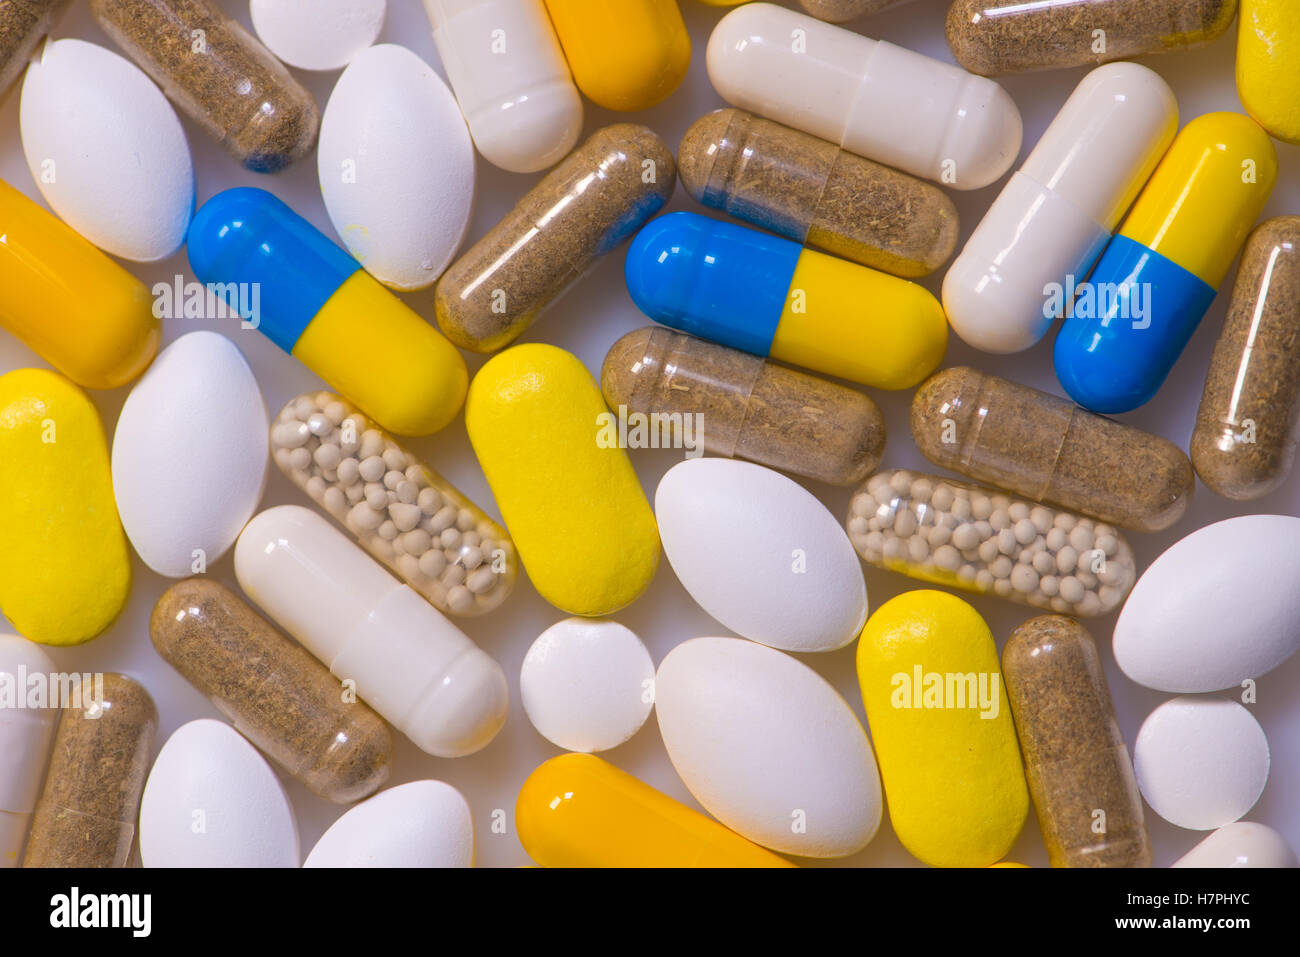 Medicine, Healthcare, Pharmaceuticals, Food supplements and homeopathy, France, Europe Stock Photo